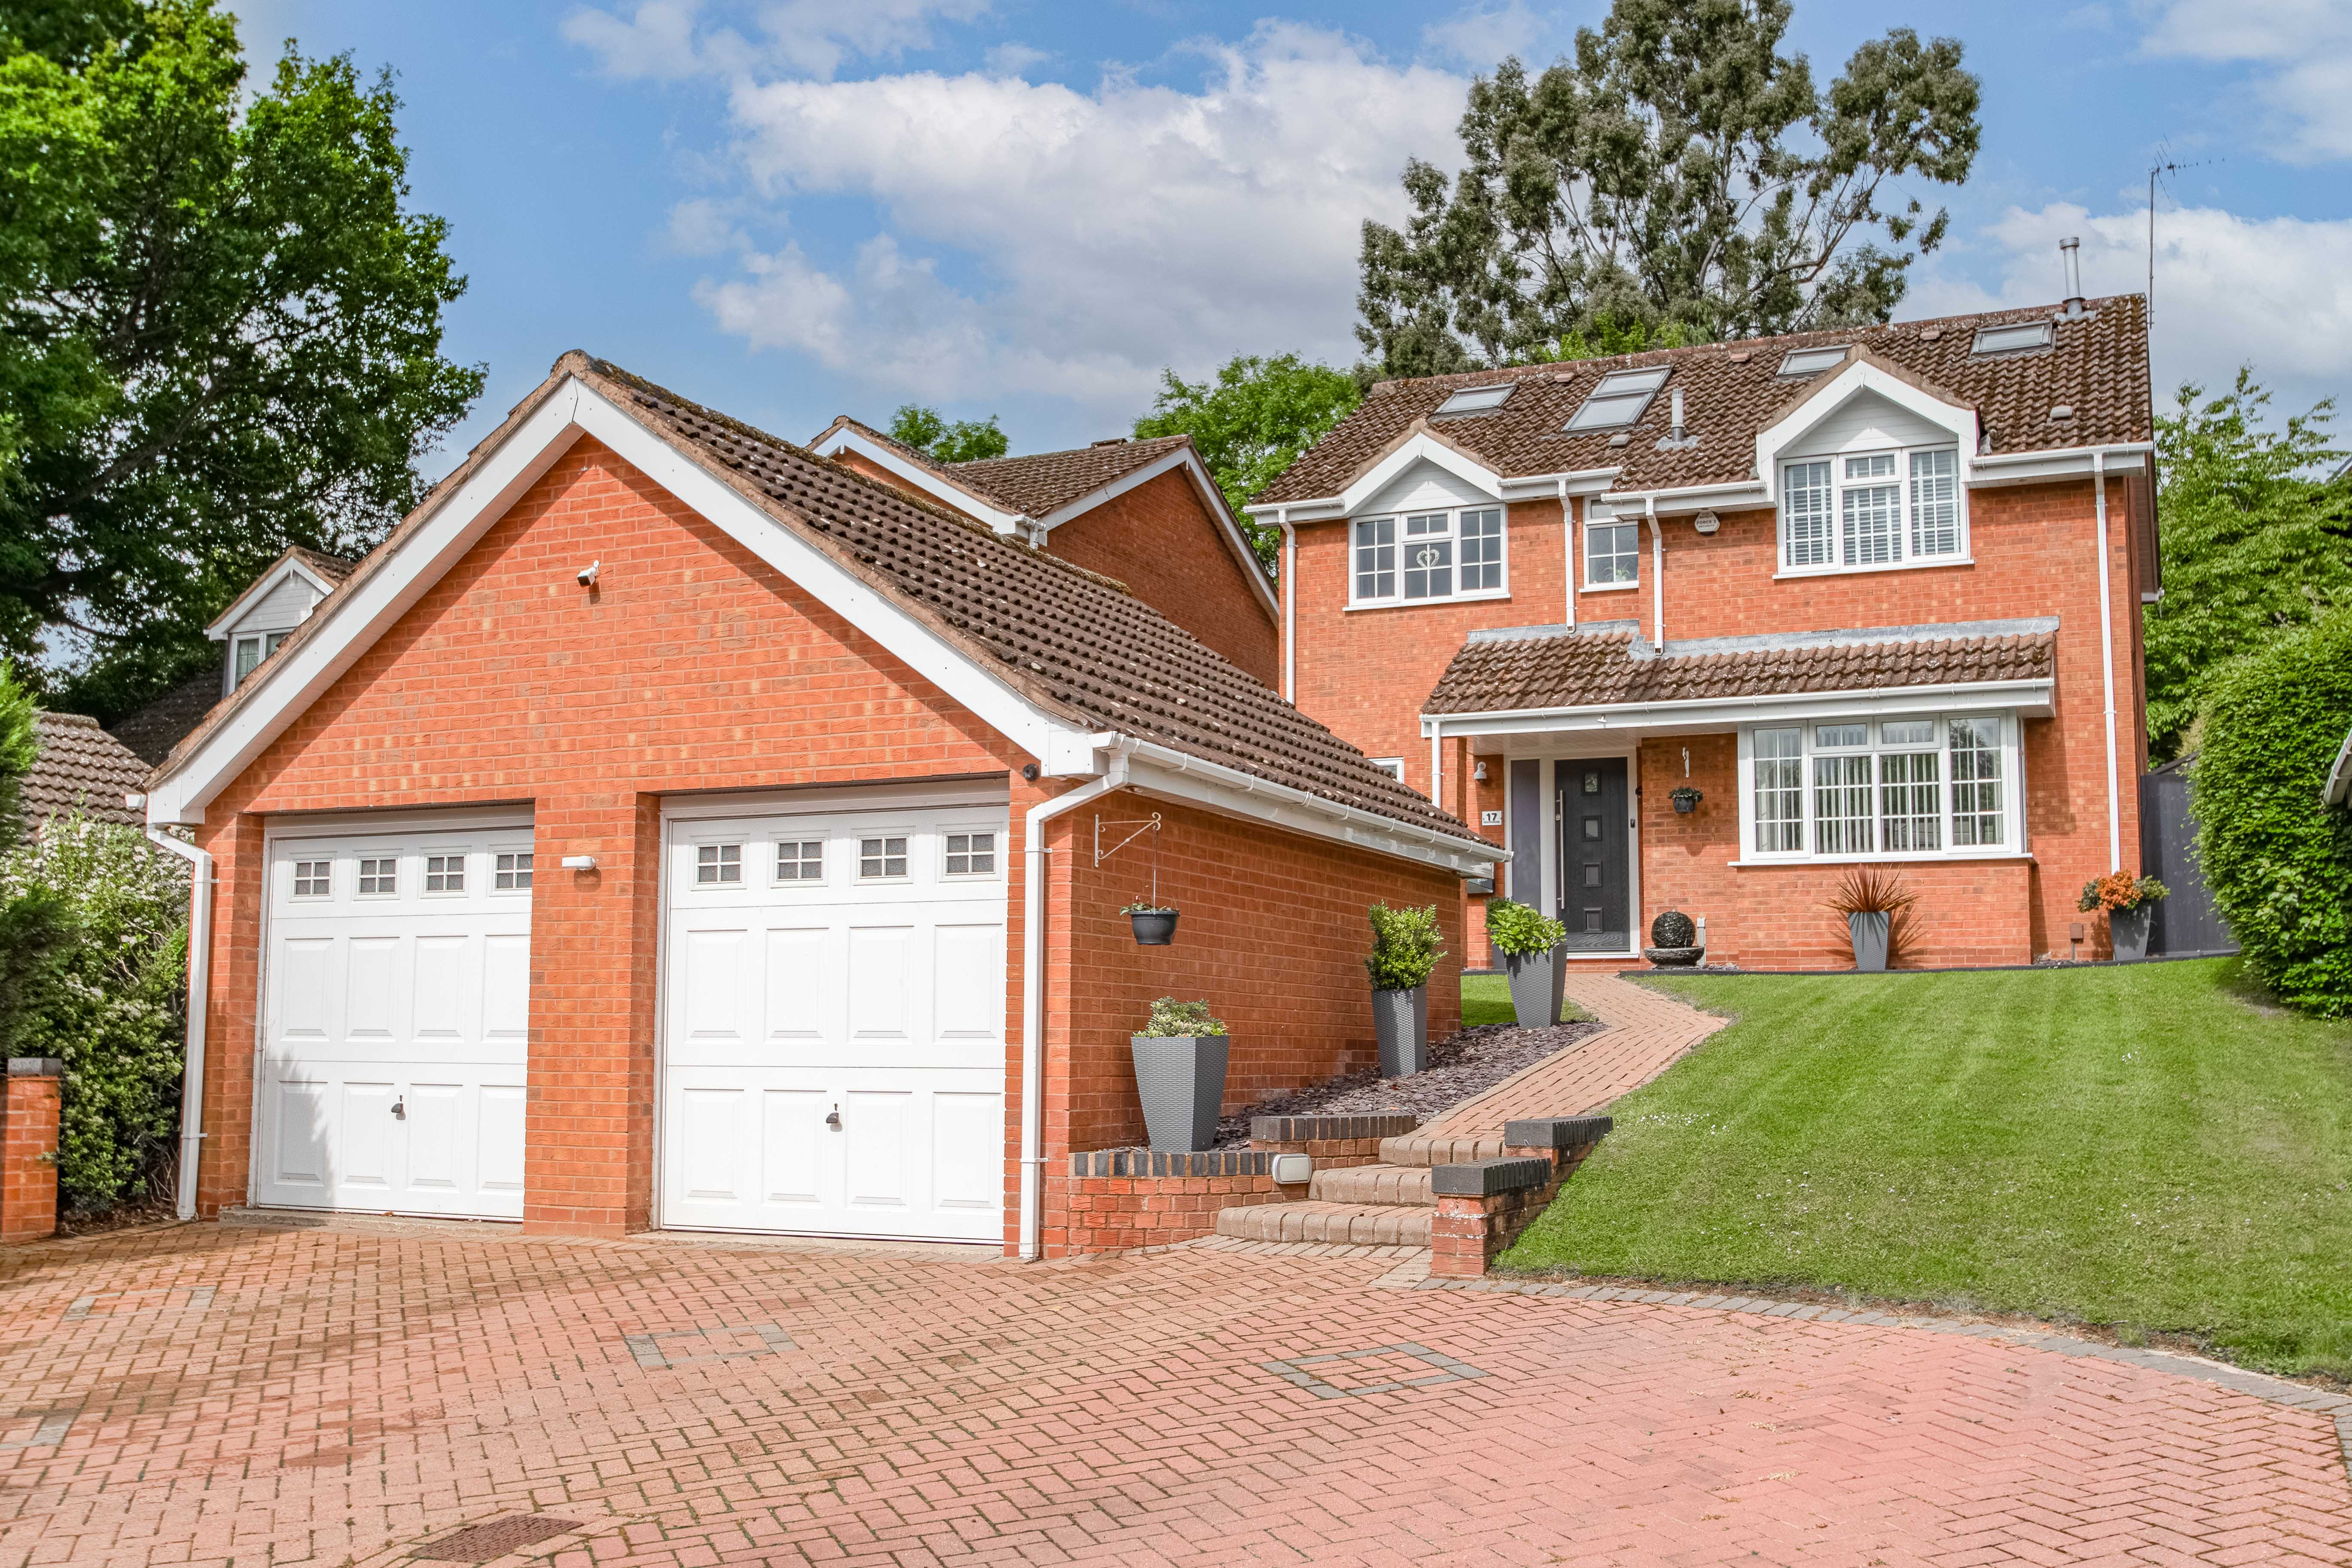 6 bed house for sale in Weatheroak Close, Redditch  - Property Image 1